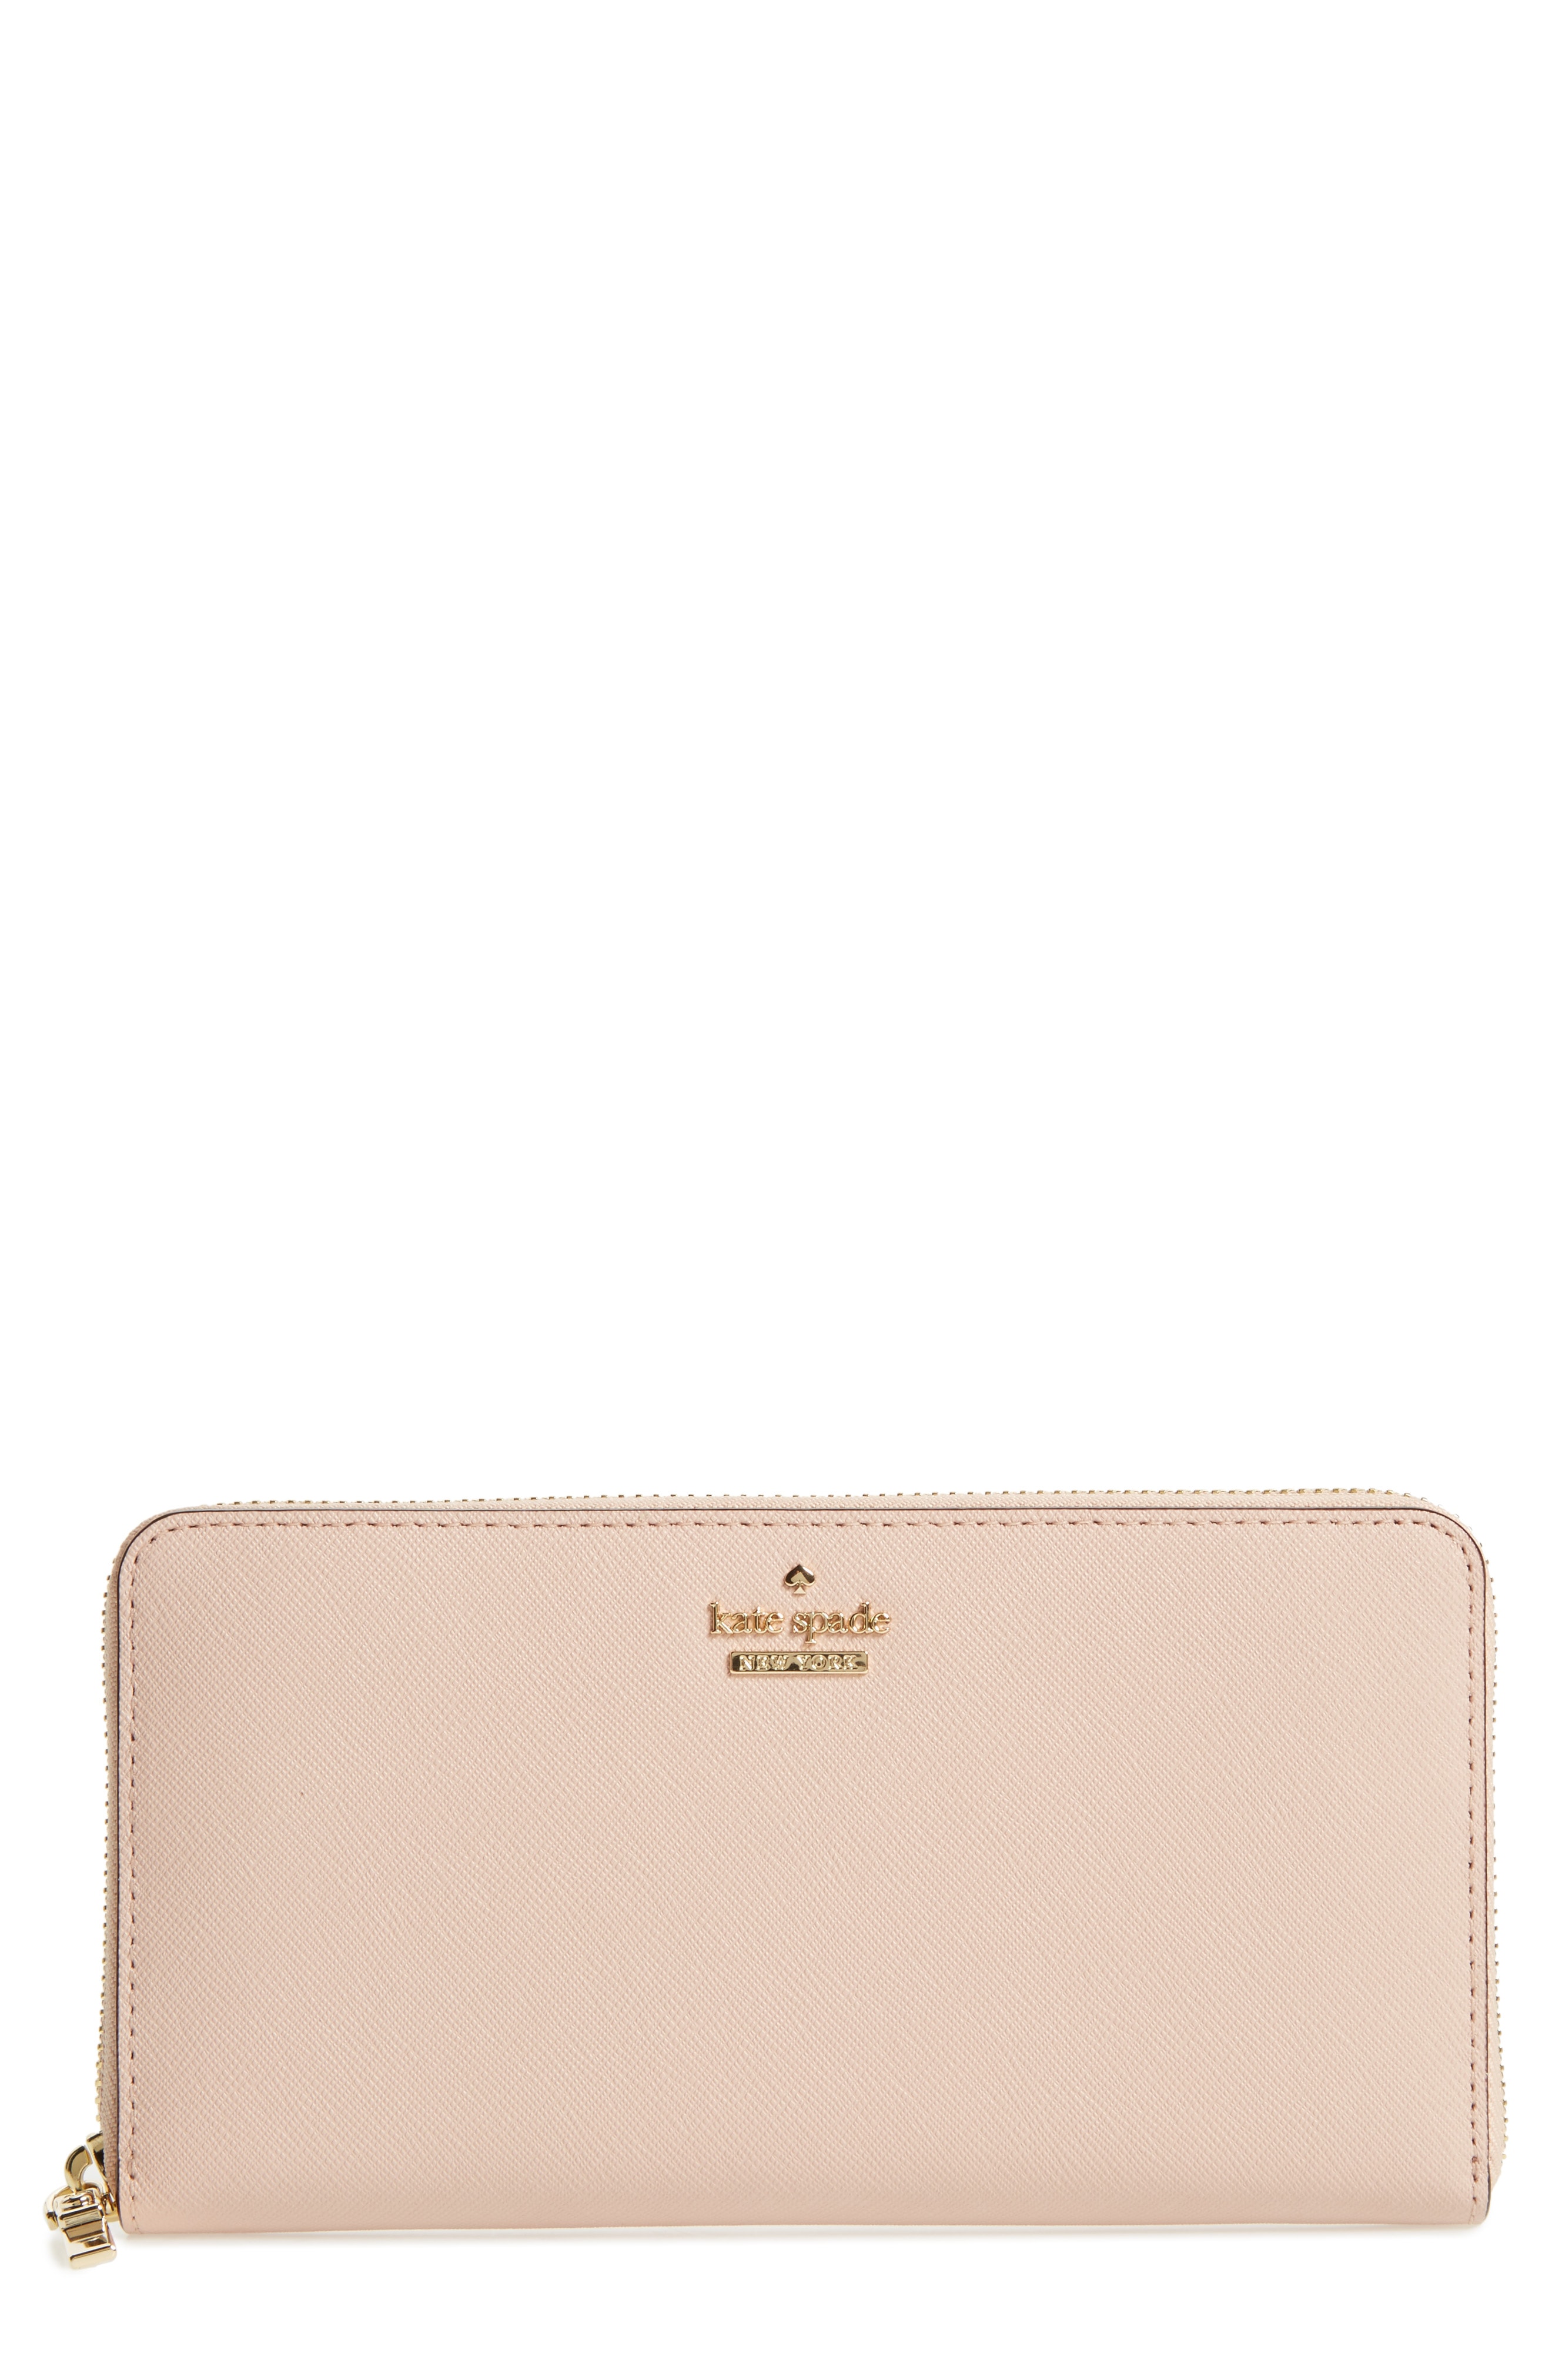 kate spade new york 'cameron street - lacey' leather wallet